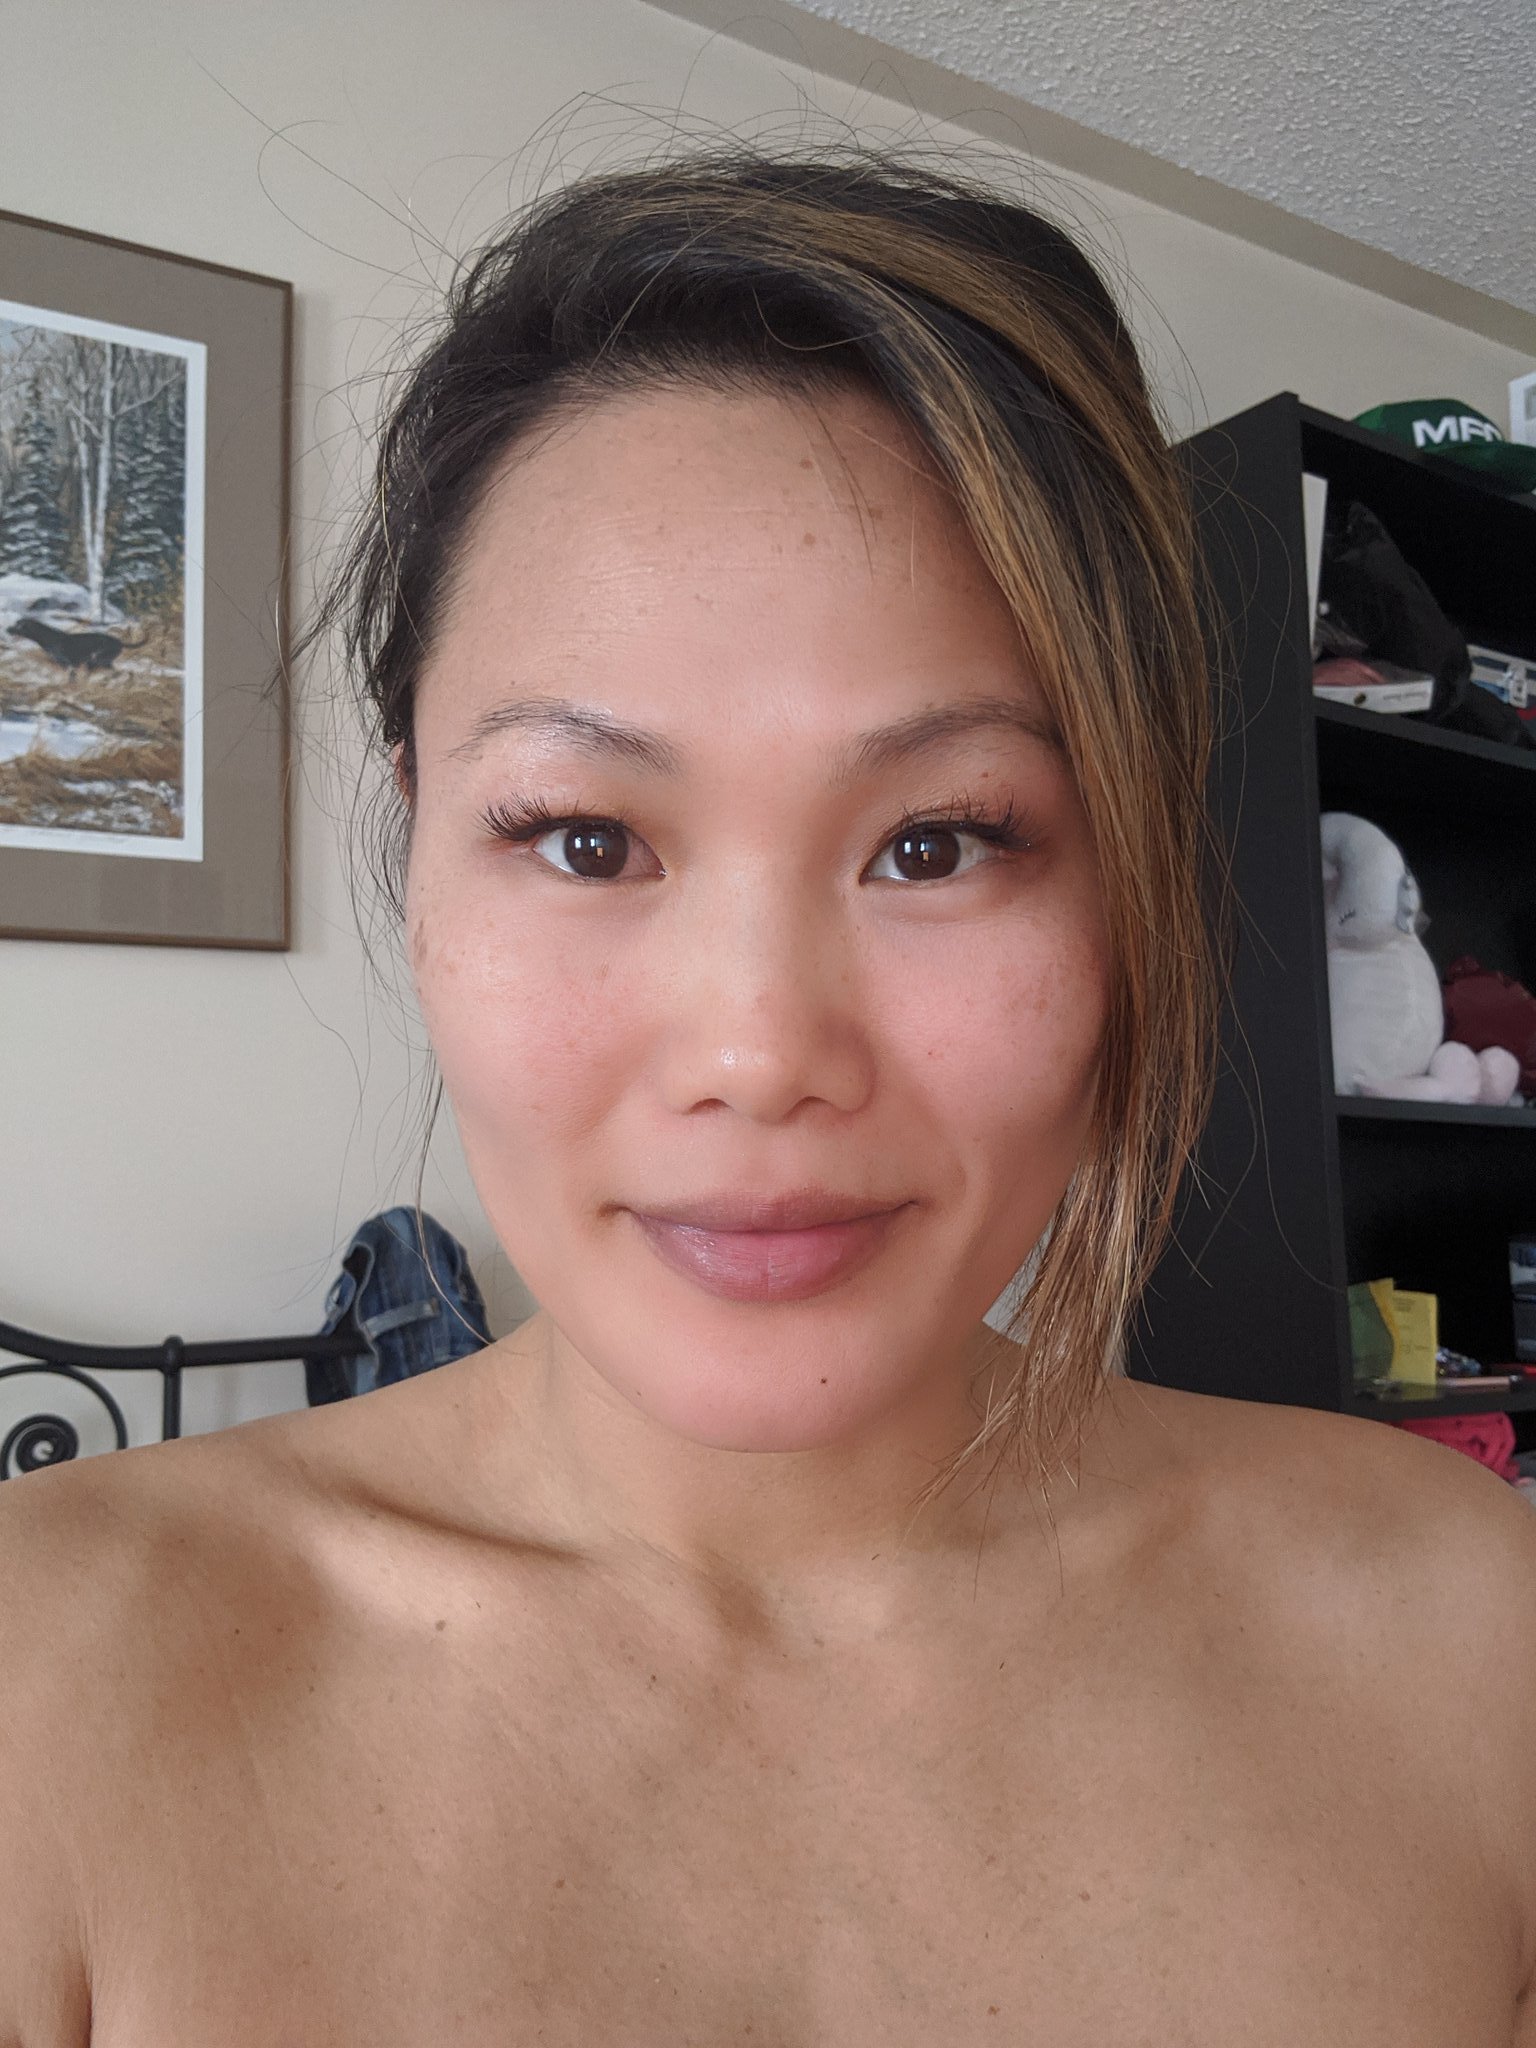 Kate Maxx ⭐ top 0.41% on ONLY FANS⭐ on X: I think you should feel just as  confident posting with or without makeup. #nomakeupchallenge  t.co4VMqkuNHwq  X